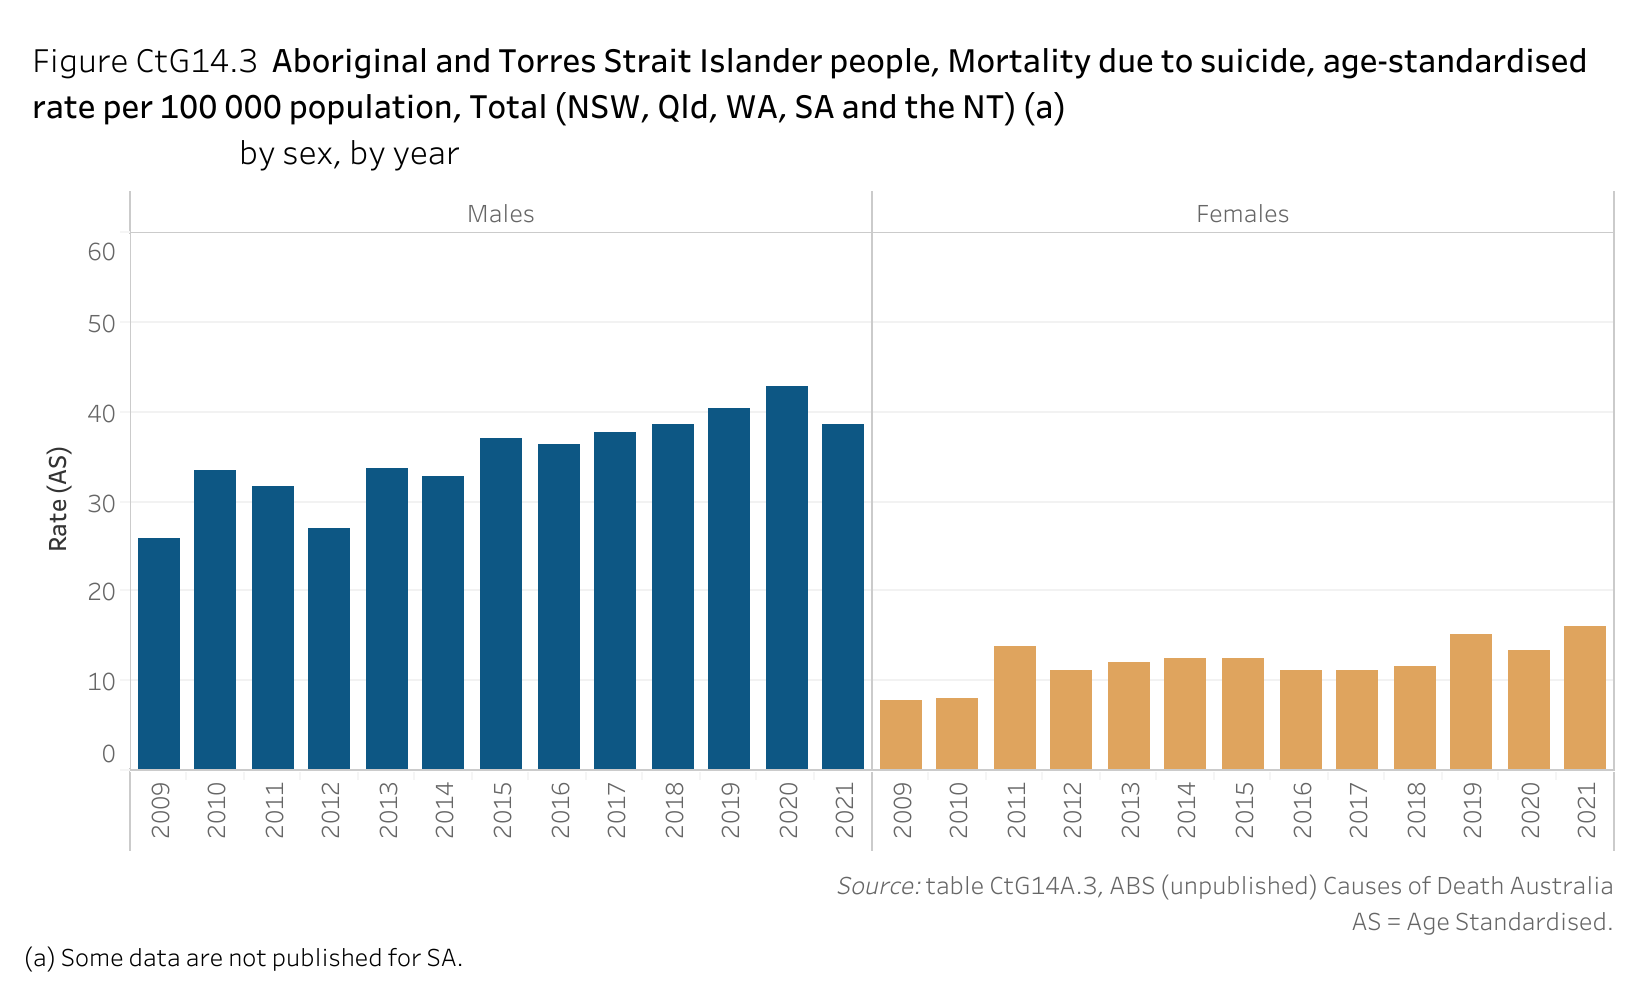 Figure CtG14.3 shows Aboriginal and Torres Strait Islander people, Mortality due to suicide, age-standardised rate per 100 000 population, Total (New South Wales, Queensland, Western Australia, South Australia and the Northern Territory), by sex, by year. More details can be found within the text near this image.